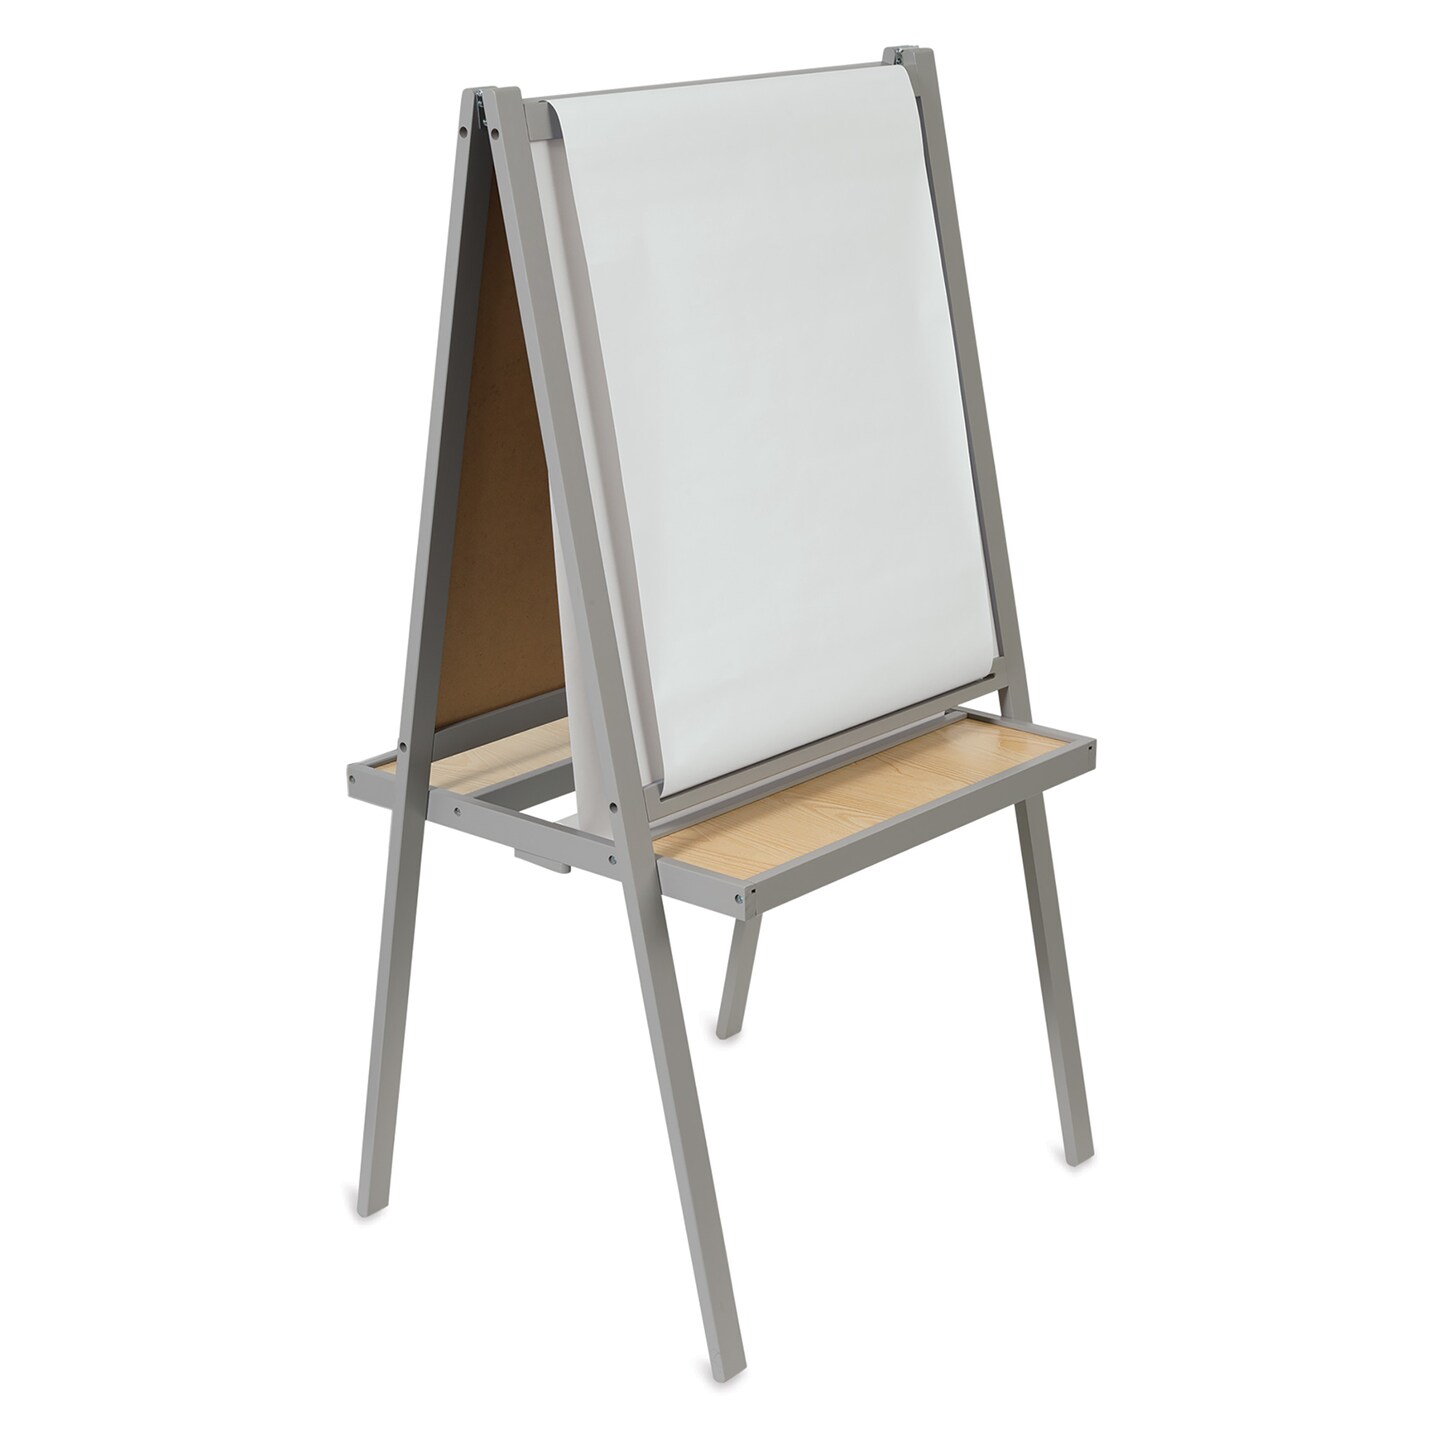 Blick Essentials Paint and Draw Easel - Gray